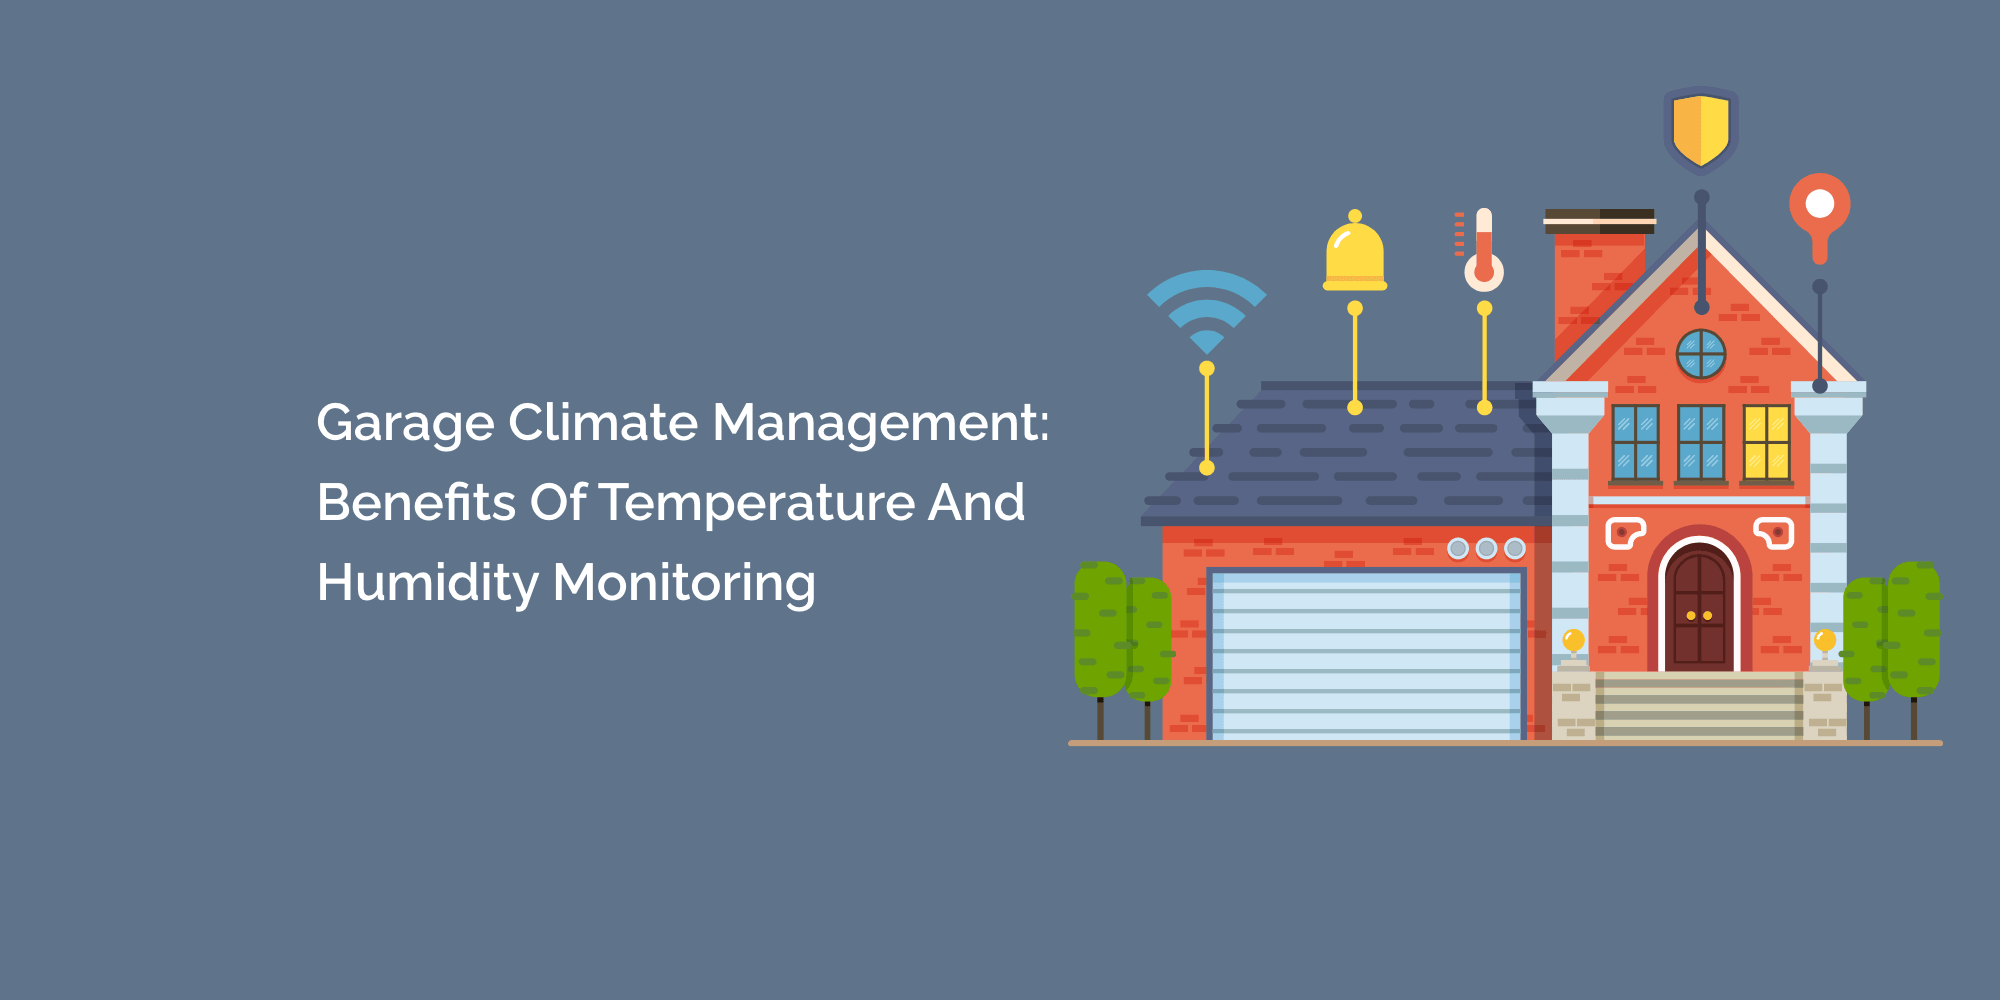 Garage Climate Management: Benefits of Temperature and Humidity Monitoring